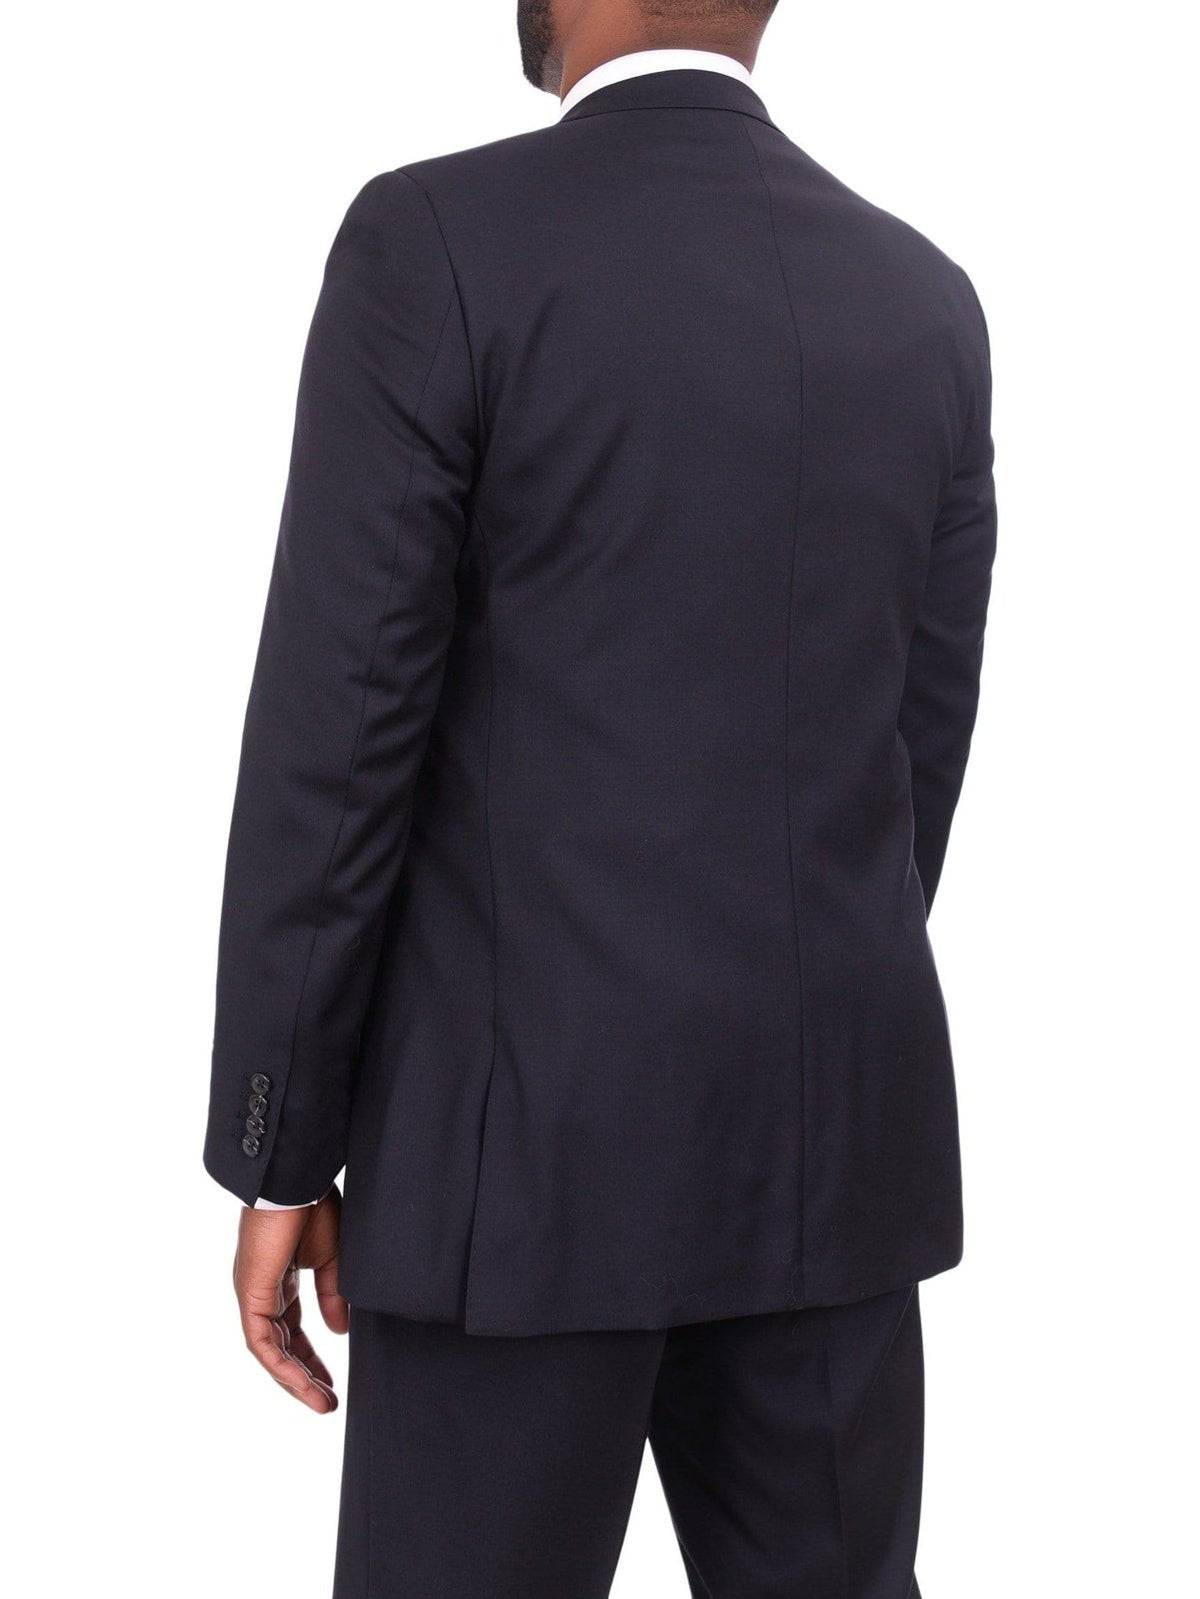 Giorgio Cosani TWO PIECE SUITS Giorgio Cosani Regular Fit Solid Navy Blue Two Button Wool Cashmere Blend Suit